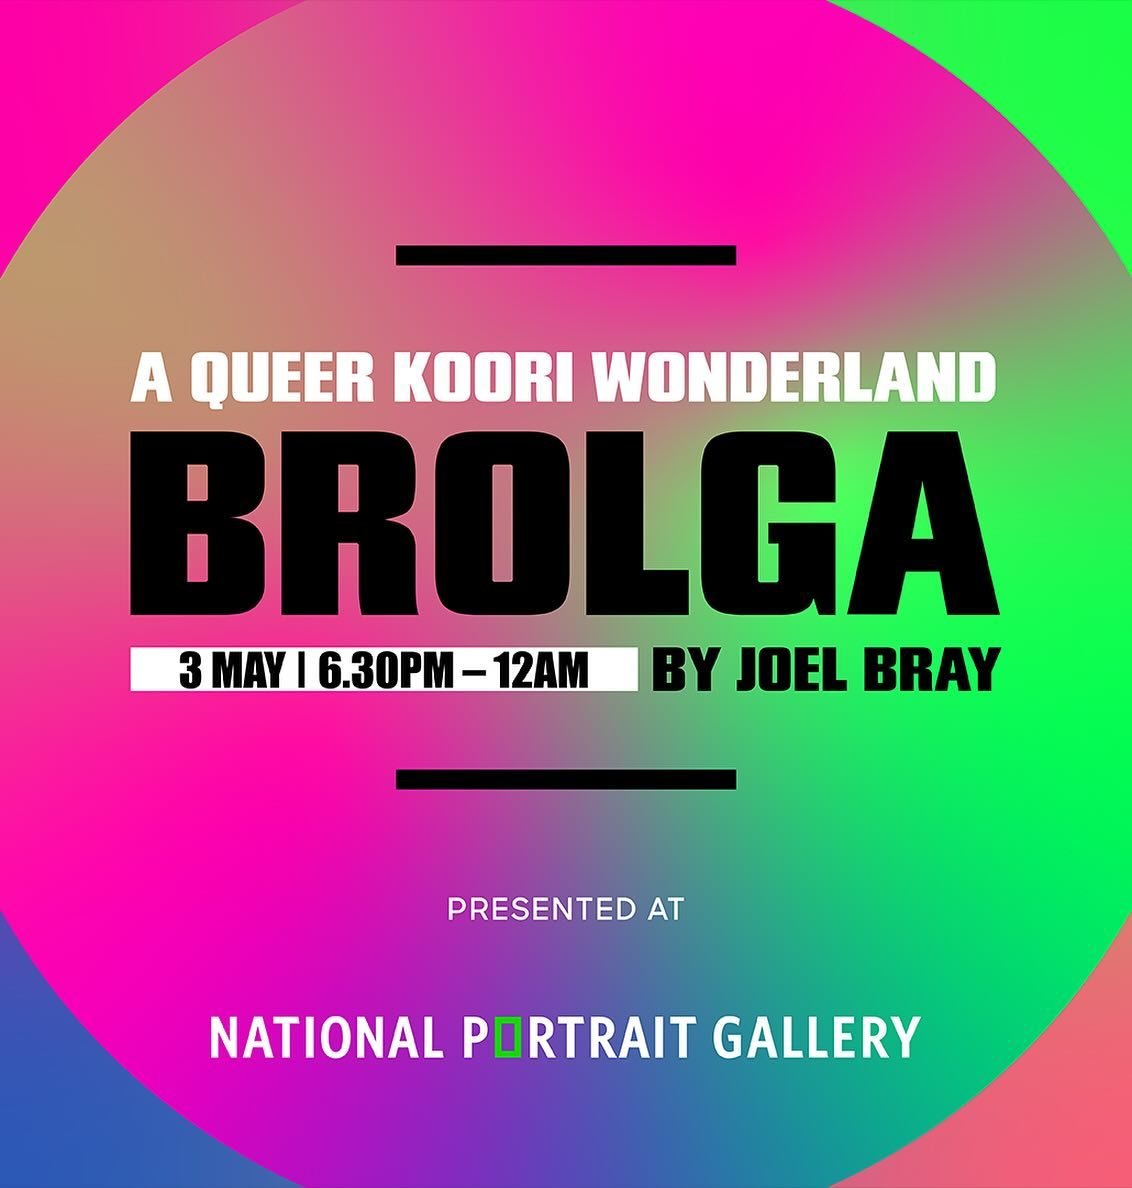 I&rsquo;m so excited to see you all the National Portrait Gallery, @portraitau for Brolga, curated by Joel Bray, @joelbraydance! 🎊🏳️&zwj;🌈🏳️&zwj;⚧️